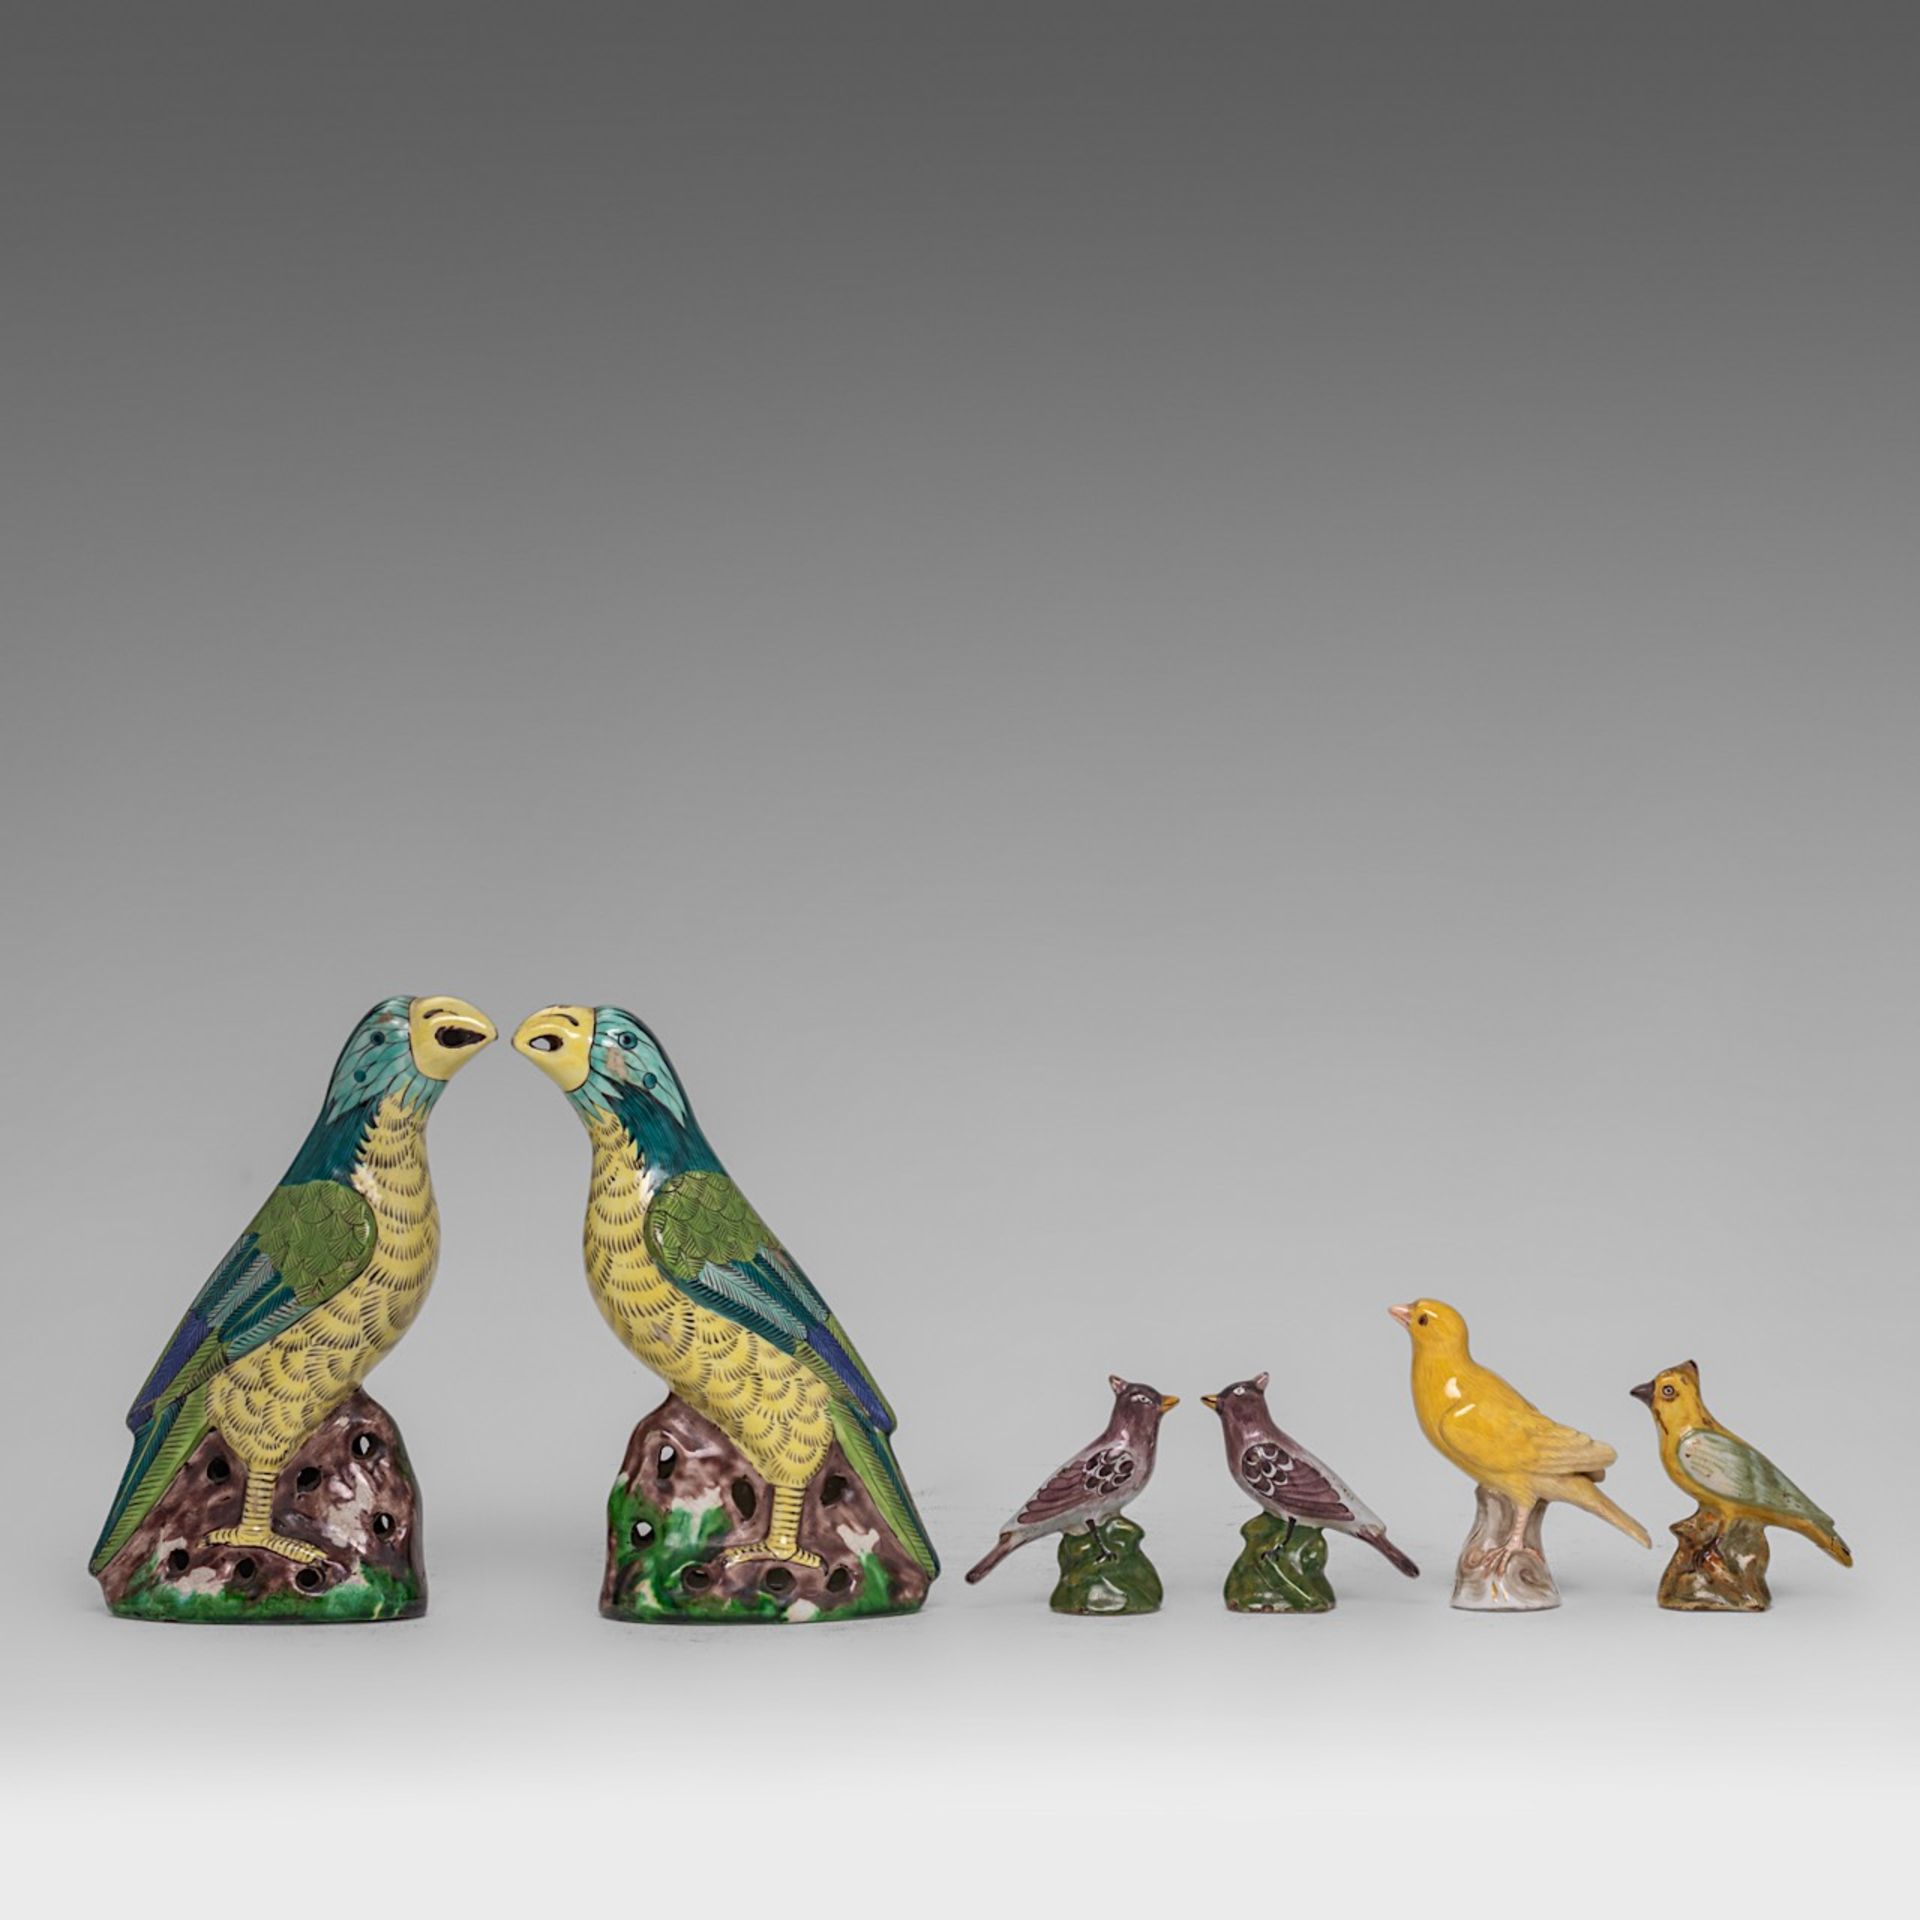 A collection of 6 faience and porcelain bird figurines, Delft, Meissen and others, H 20 cm (tallest) - Image 2 of 5